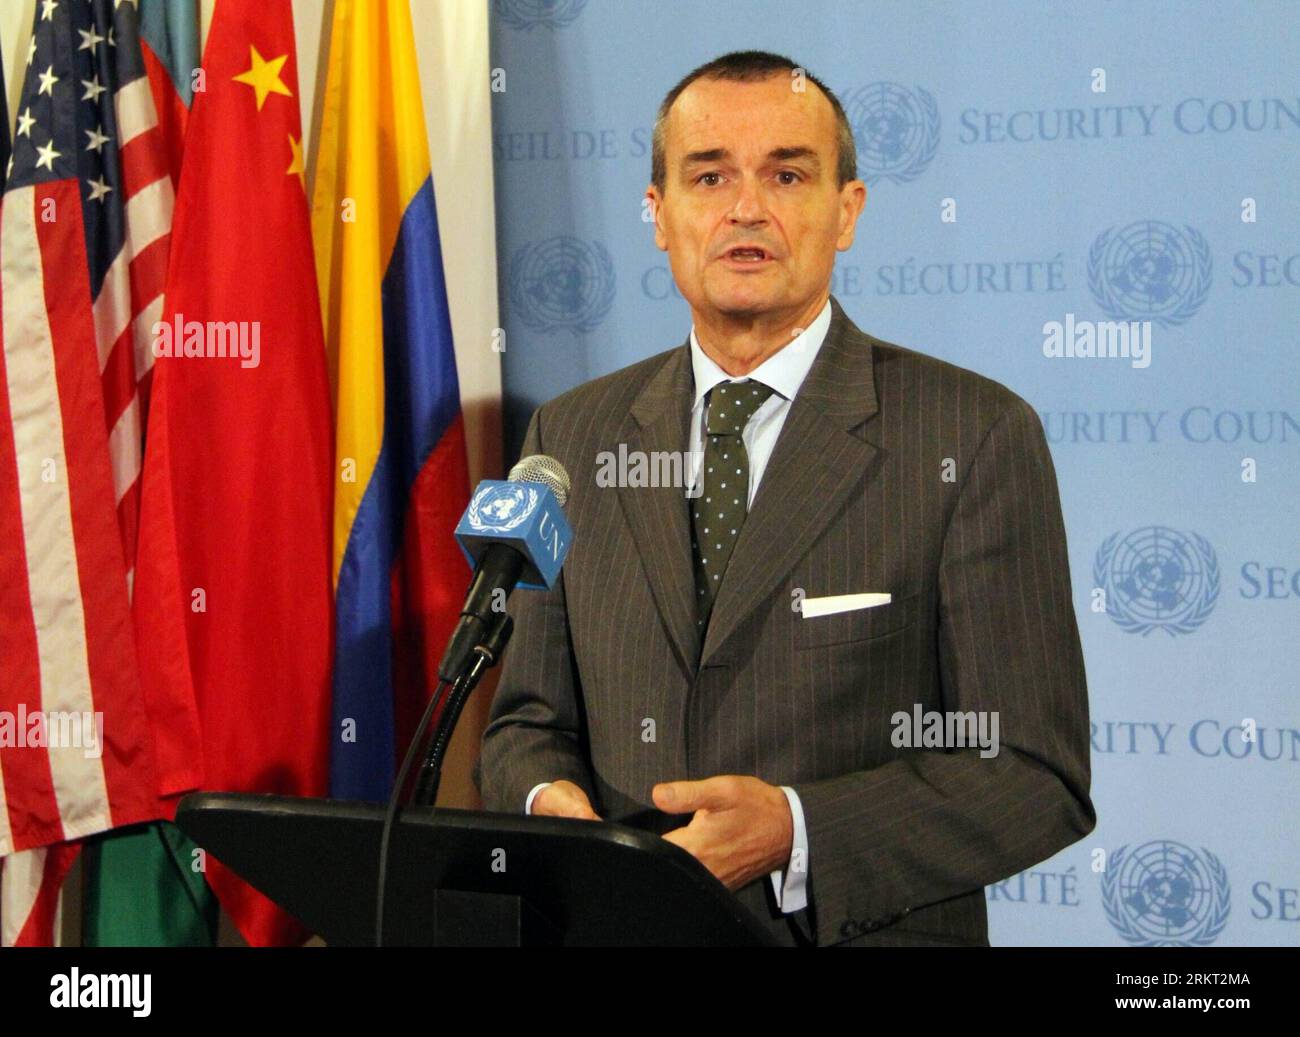 Bildnummer: 58356387  Datum: 16.08.2012  Copyright: imago/Xinhua (120816) -- NEW YORK, Aug. 16, 2012 (Xinhua) -- The French permanent representative to the United Nations Gerad Araud makes an announcement to medias after a two-hour closed-door meeting at the UN headquarters in New York on August 16, 2012. The UN Security Council on Thursday said that it agreed to the establishment of a new political liaison office in the Syrian capital Damascus to back the efforts of the UN and the Arab League to bring an early end to the 17-month crisis in Syria. (Xinhua/Lin Qiong) UN-NEW YORK-POLITICS-SYRIA Stock Photo